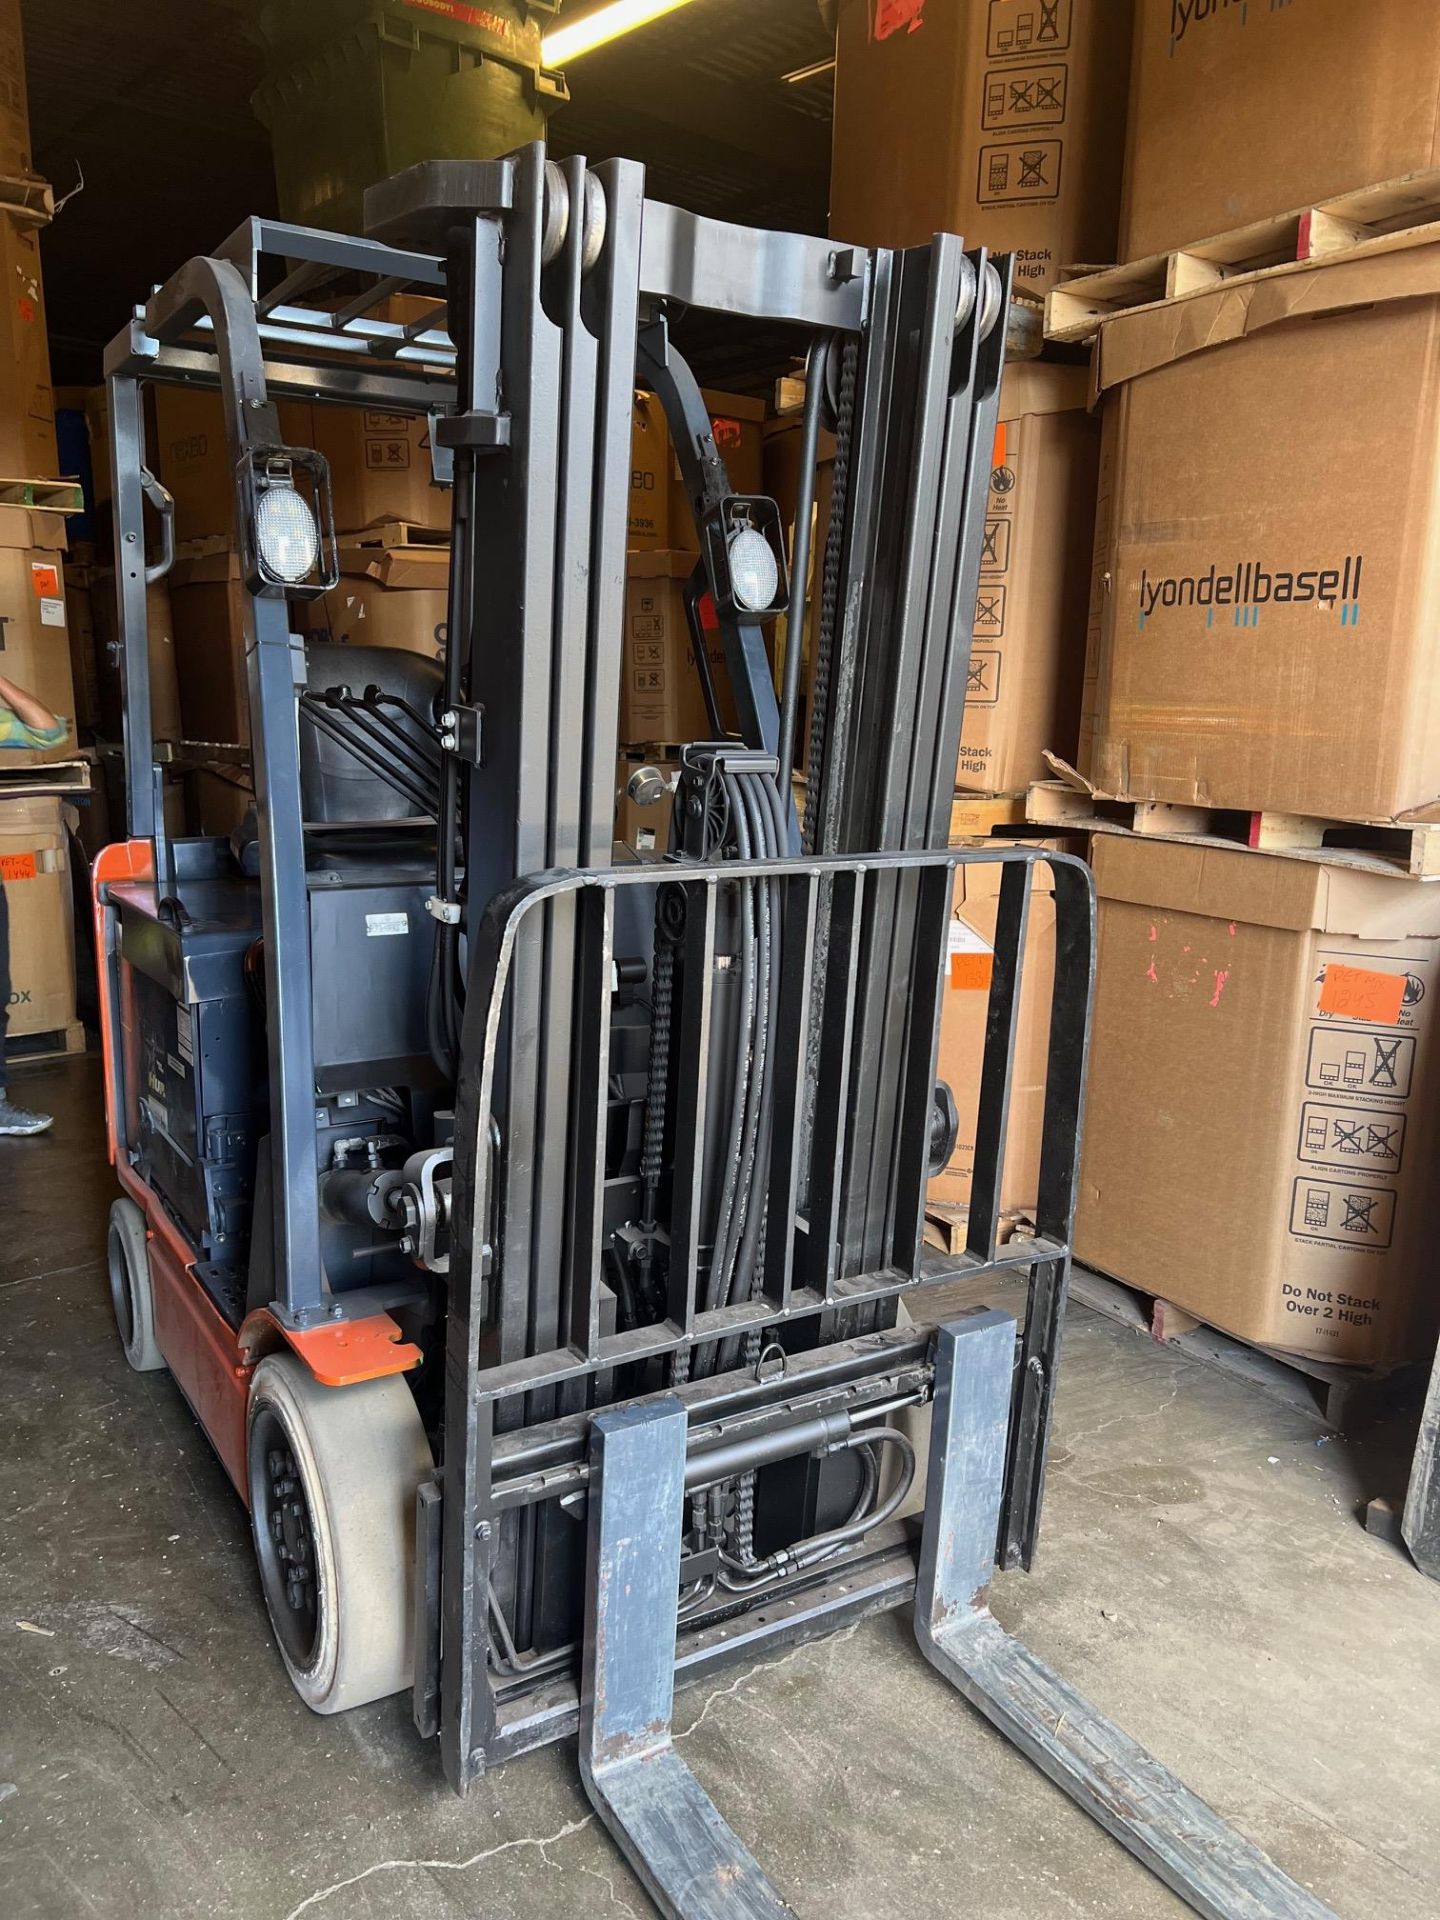 TOYOTA ELECTRIC FORKLIFT, MODEL 8FBCU25, LIFTING CAPACITY 4400 LBS, HRS 8359 - Image 6 of 6